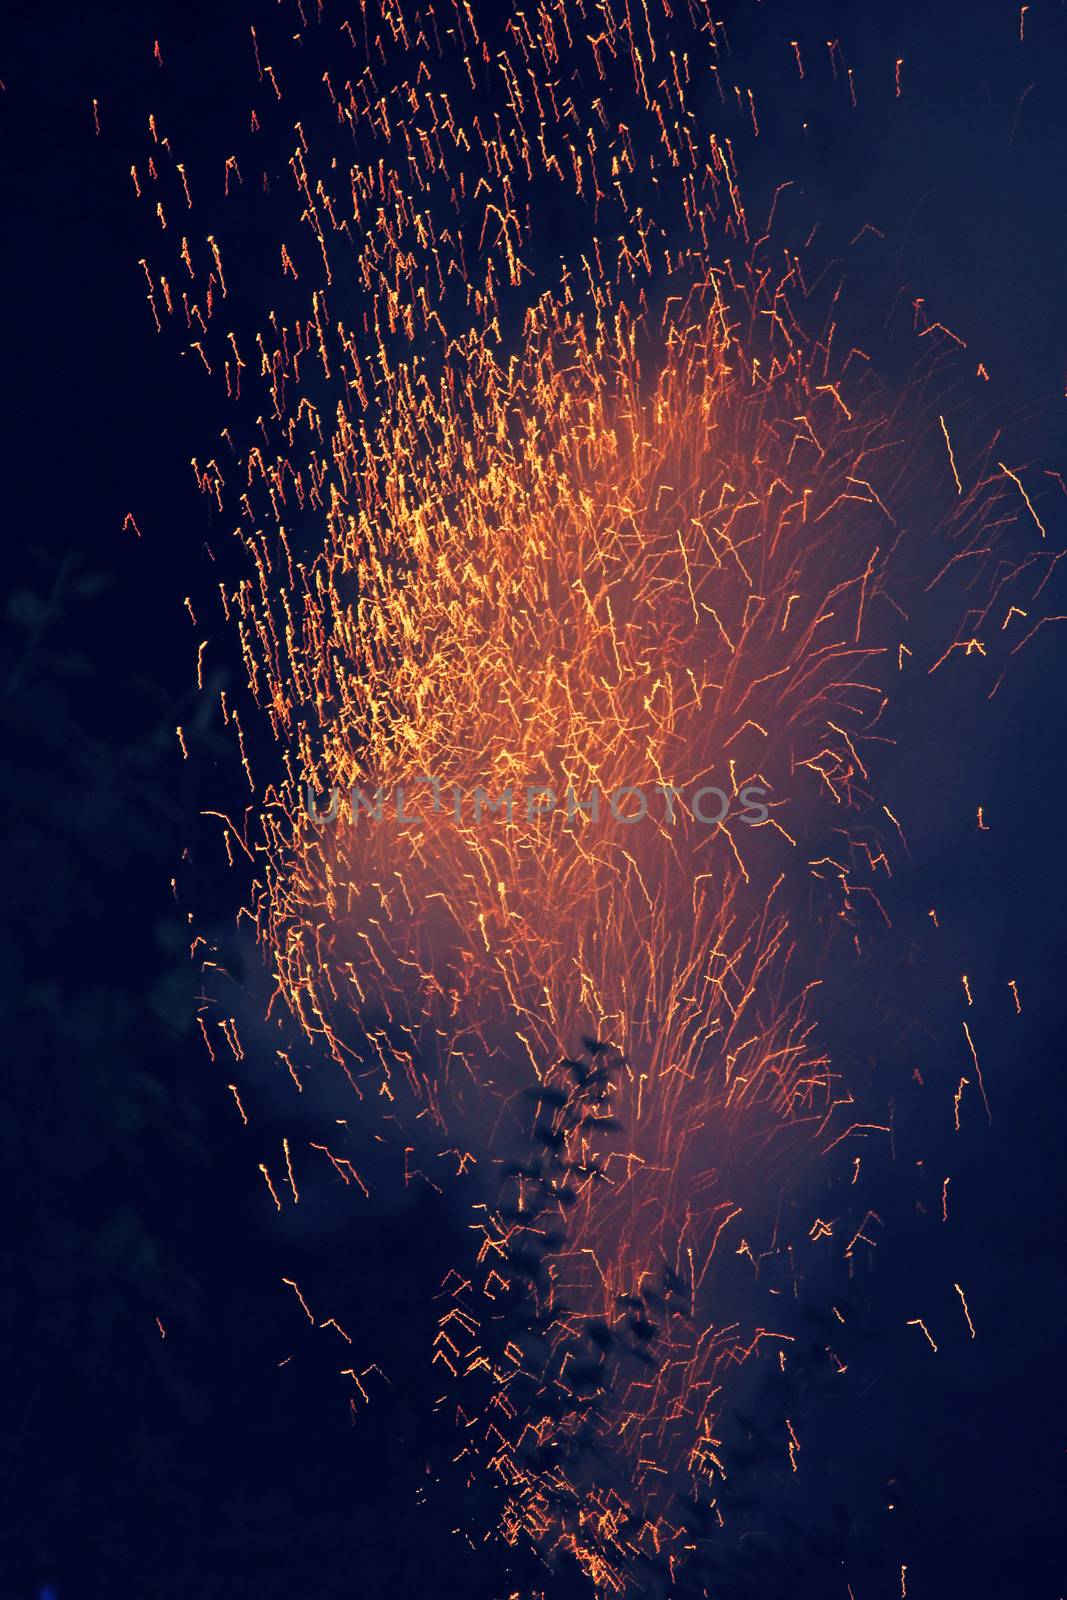 Firecrackers on occasion of Indian festival of lights, Diwali